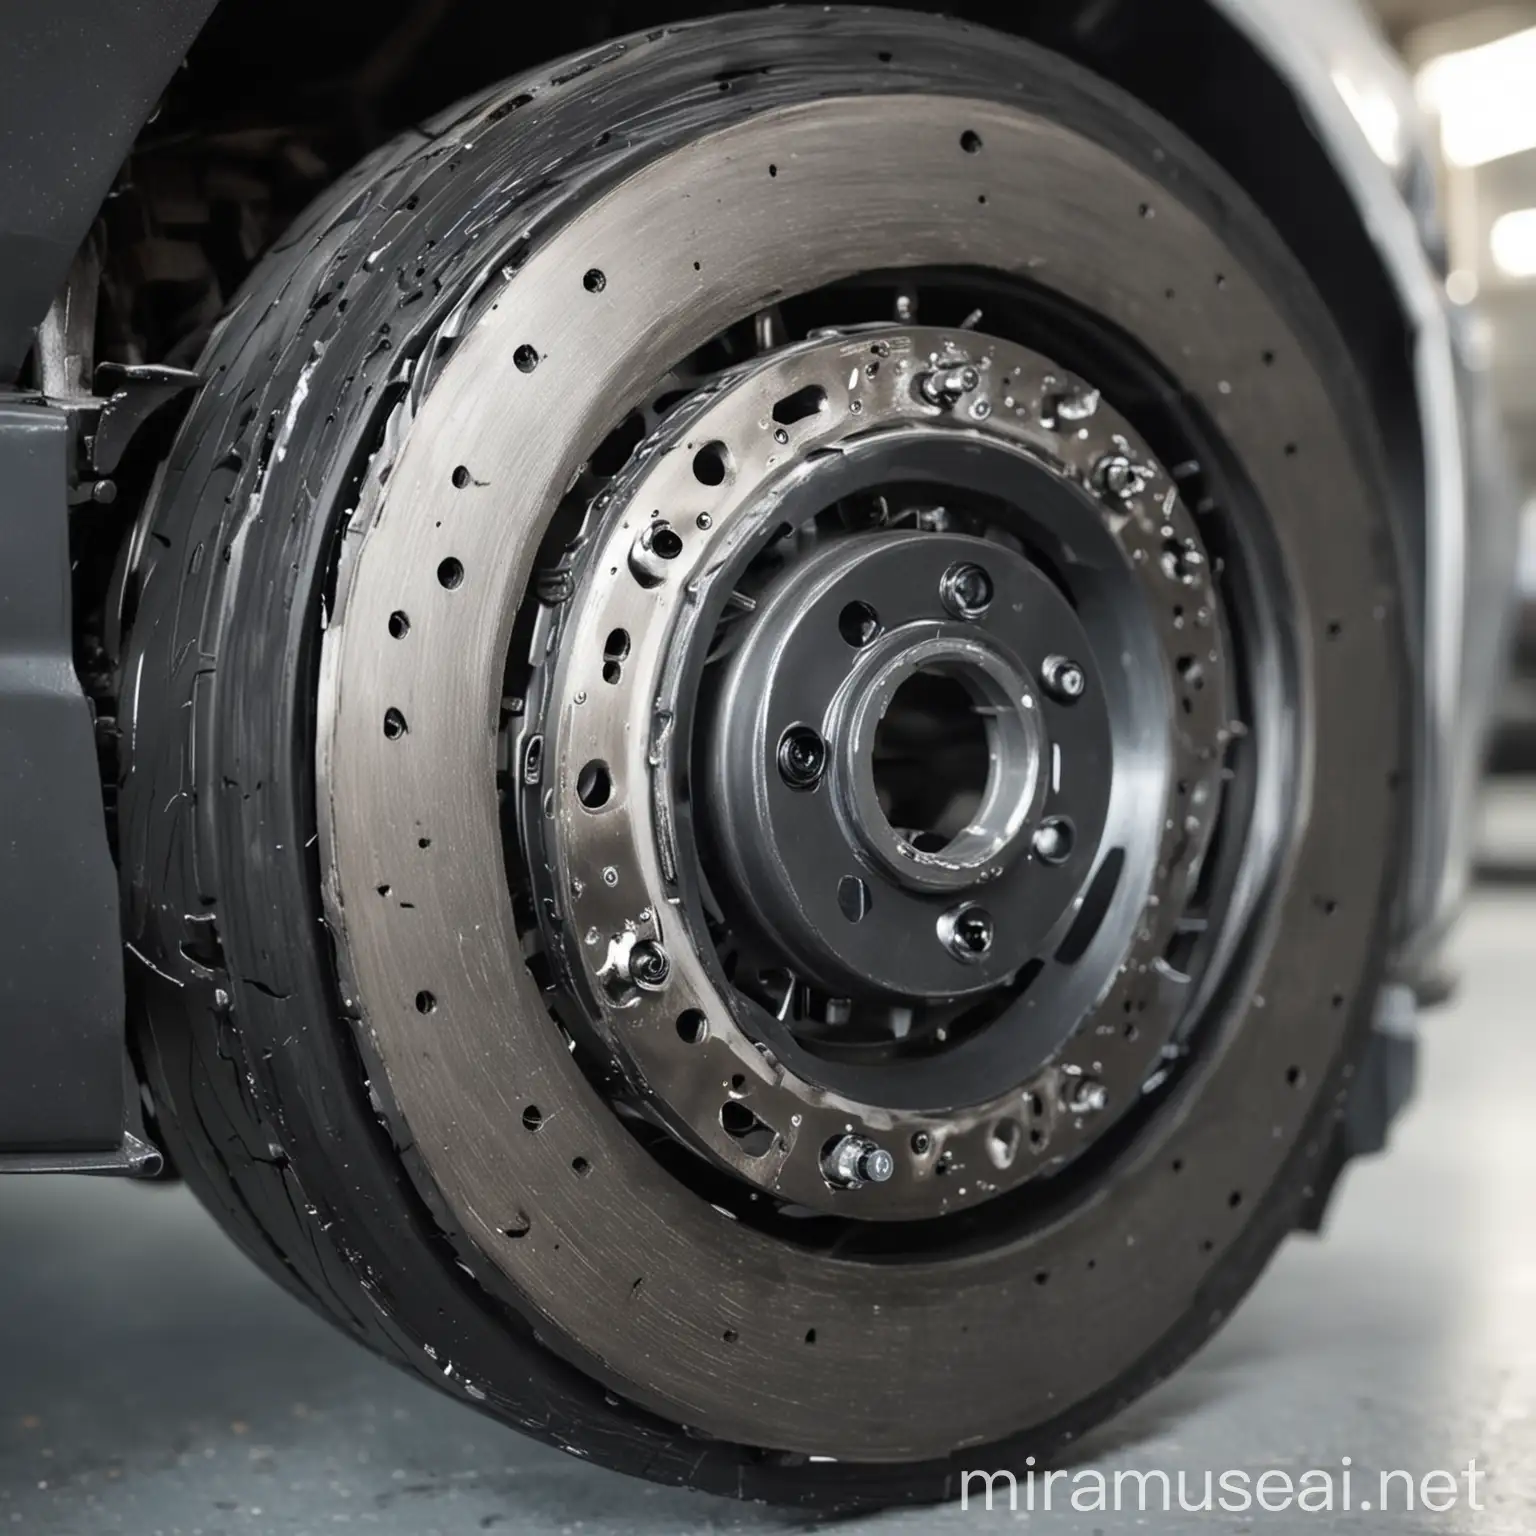 Car high-definition image, can see the brake disc